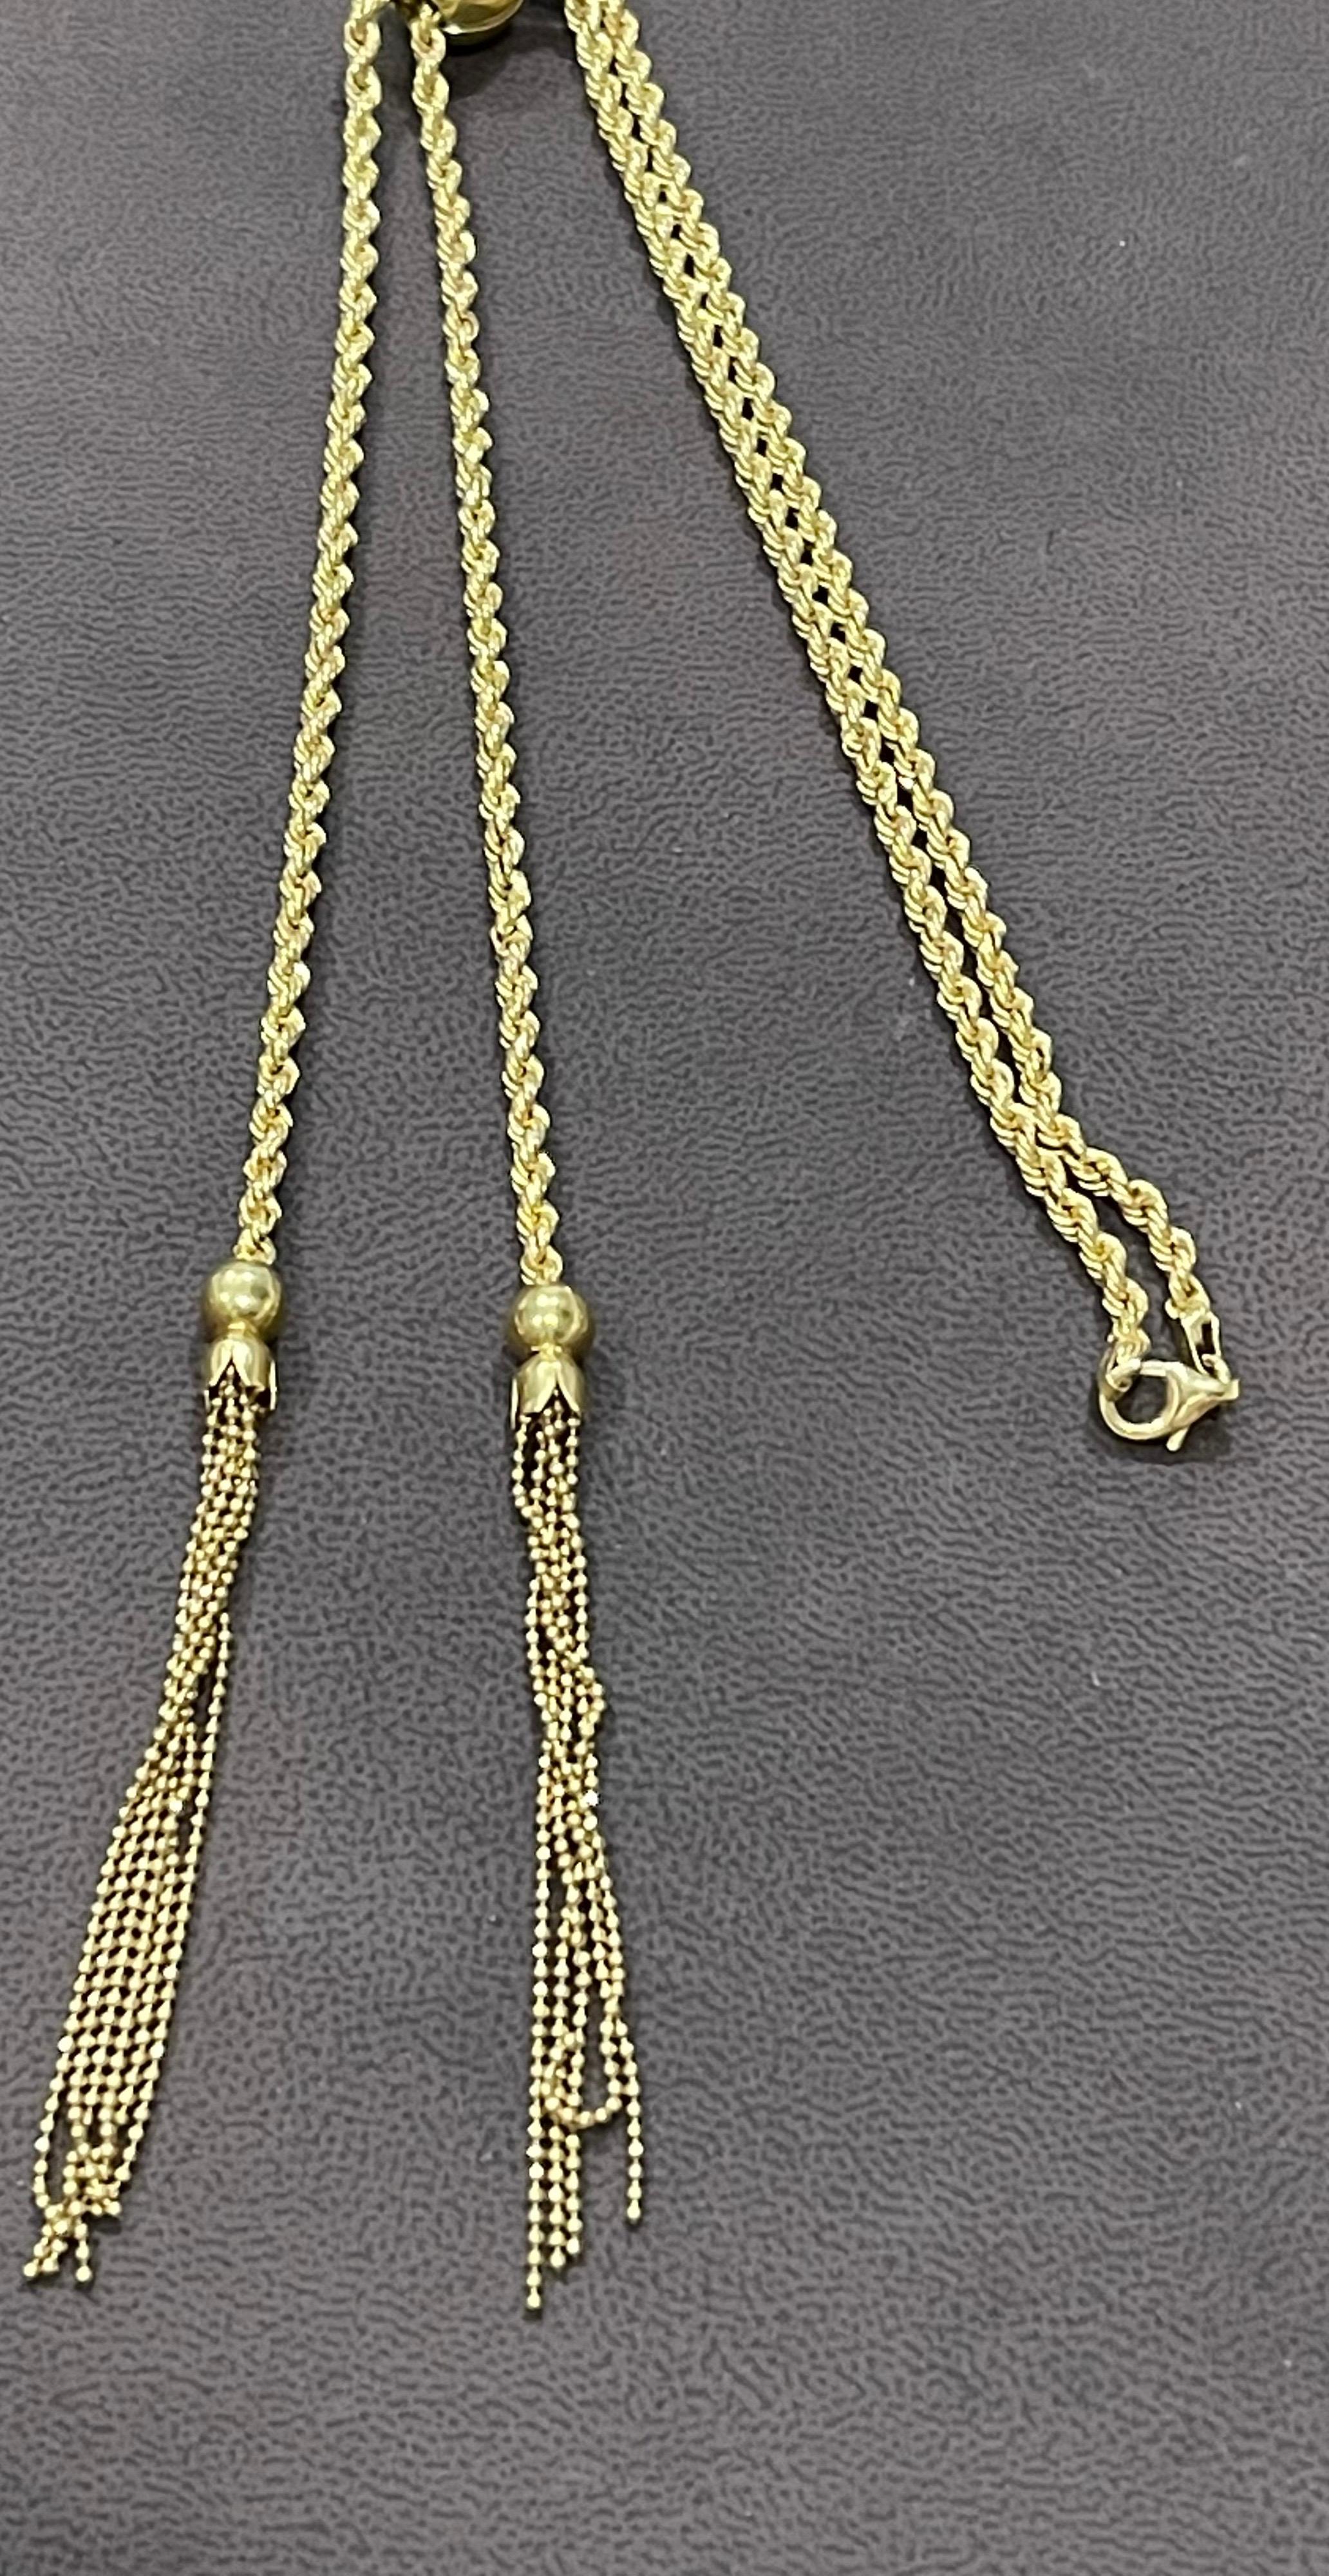 Vintage 18k Gold 18.7 Gm Rope Chain Adjustable Sliding Chain with Ball 6